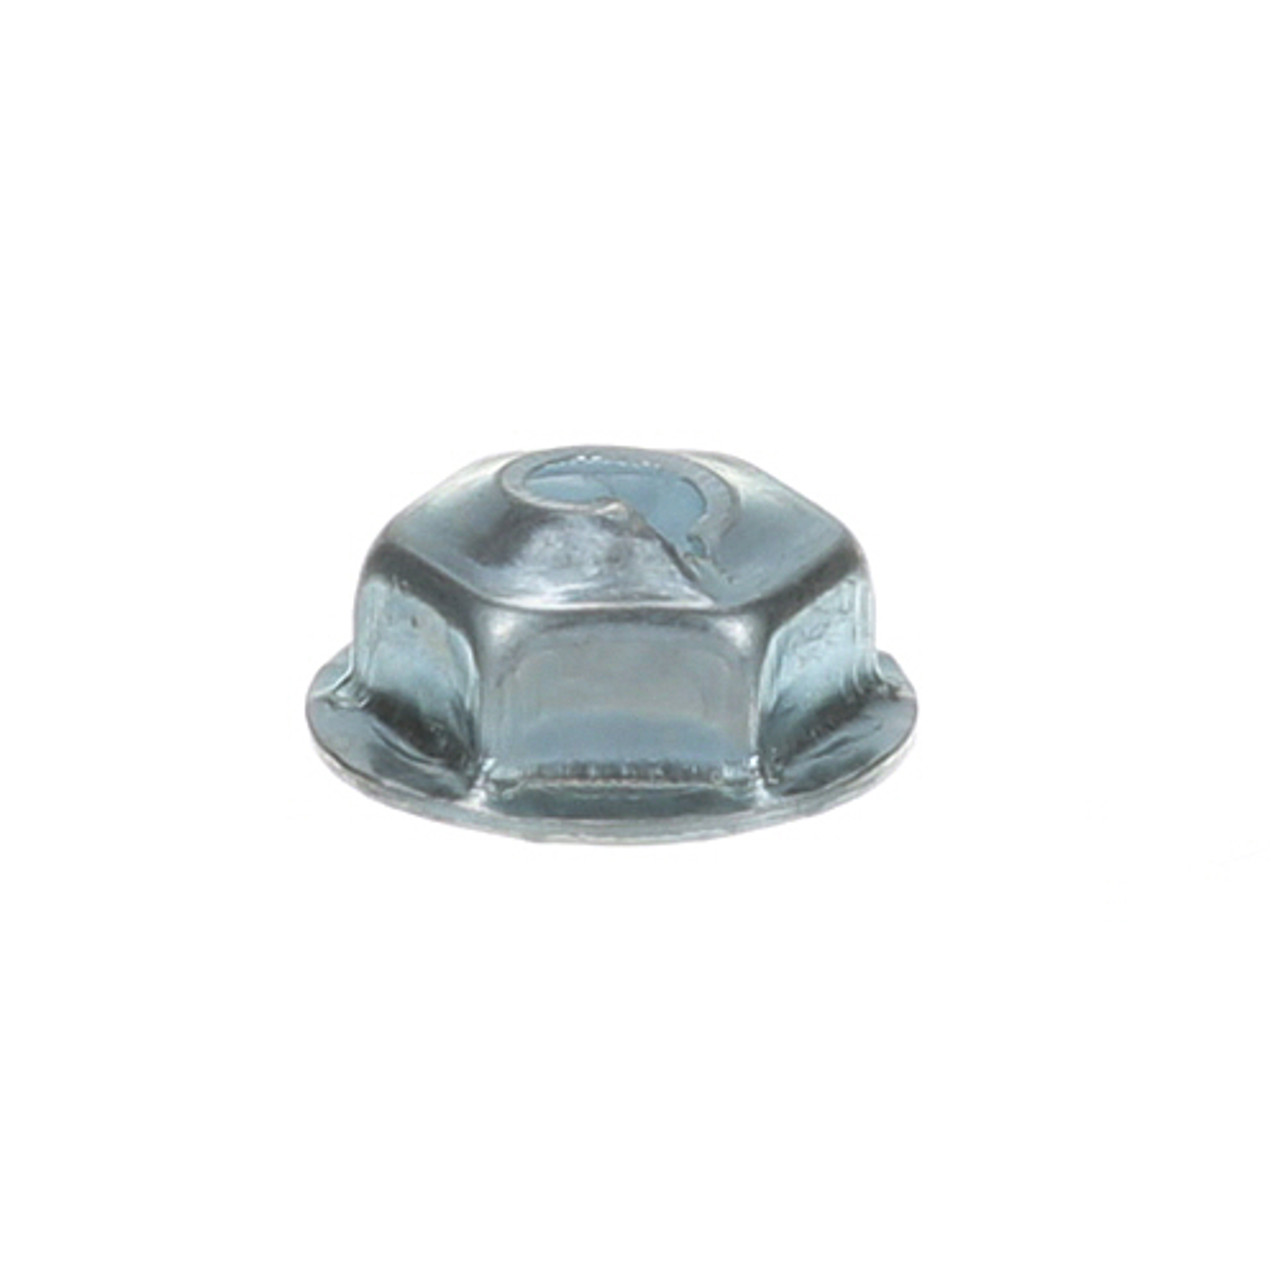 Speed 10-24 Pal Zinc Nut - Replacement Part For APW 2C-89025